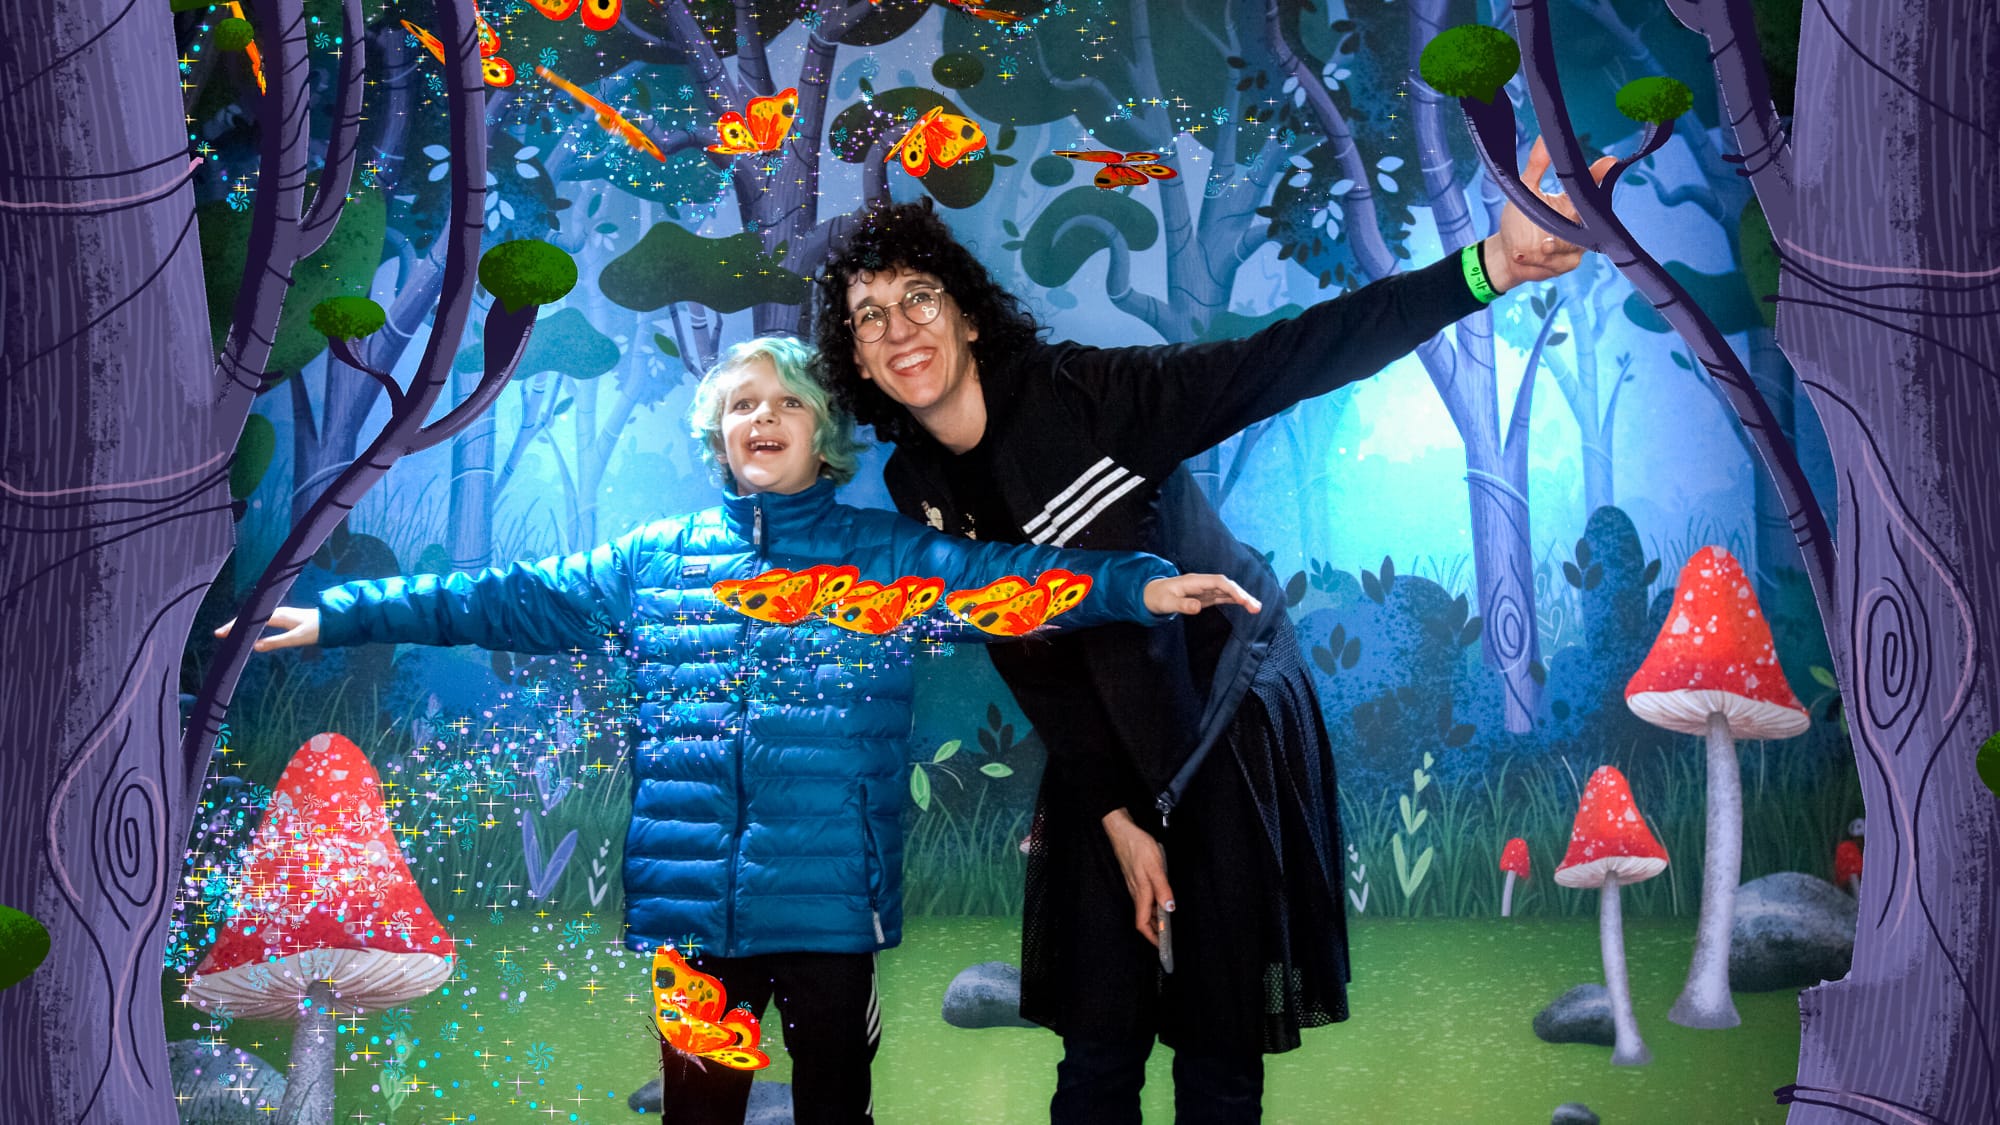 Mother and son pose with animated butterflies in the AR photo booth